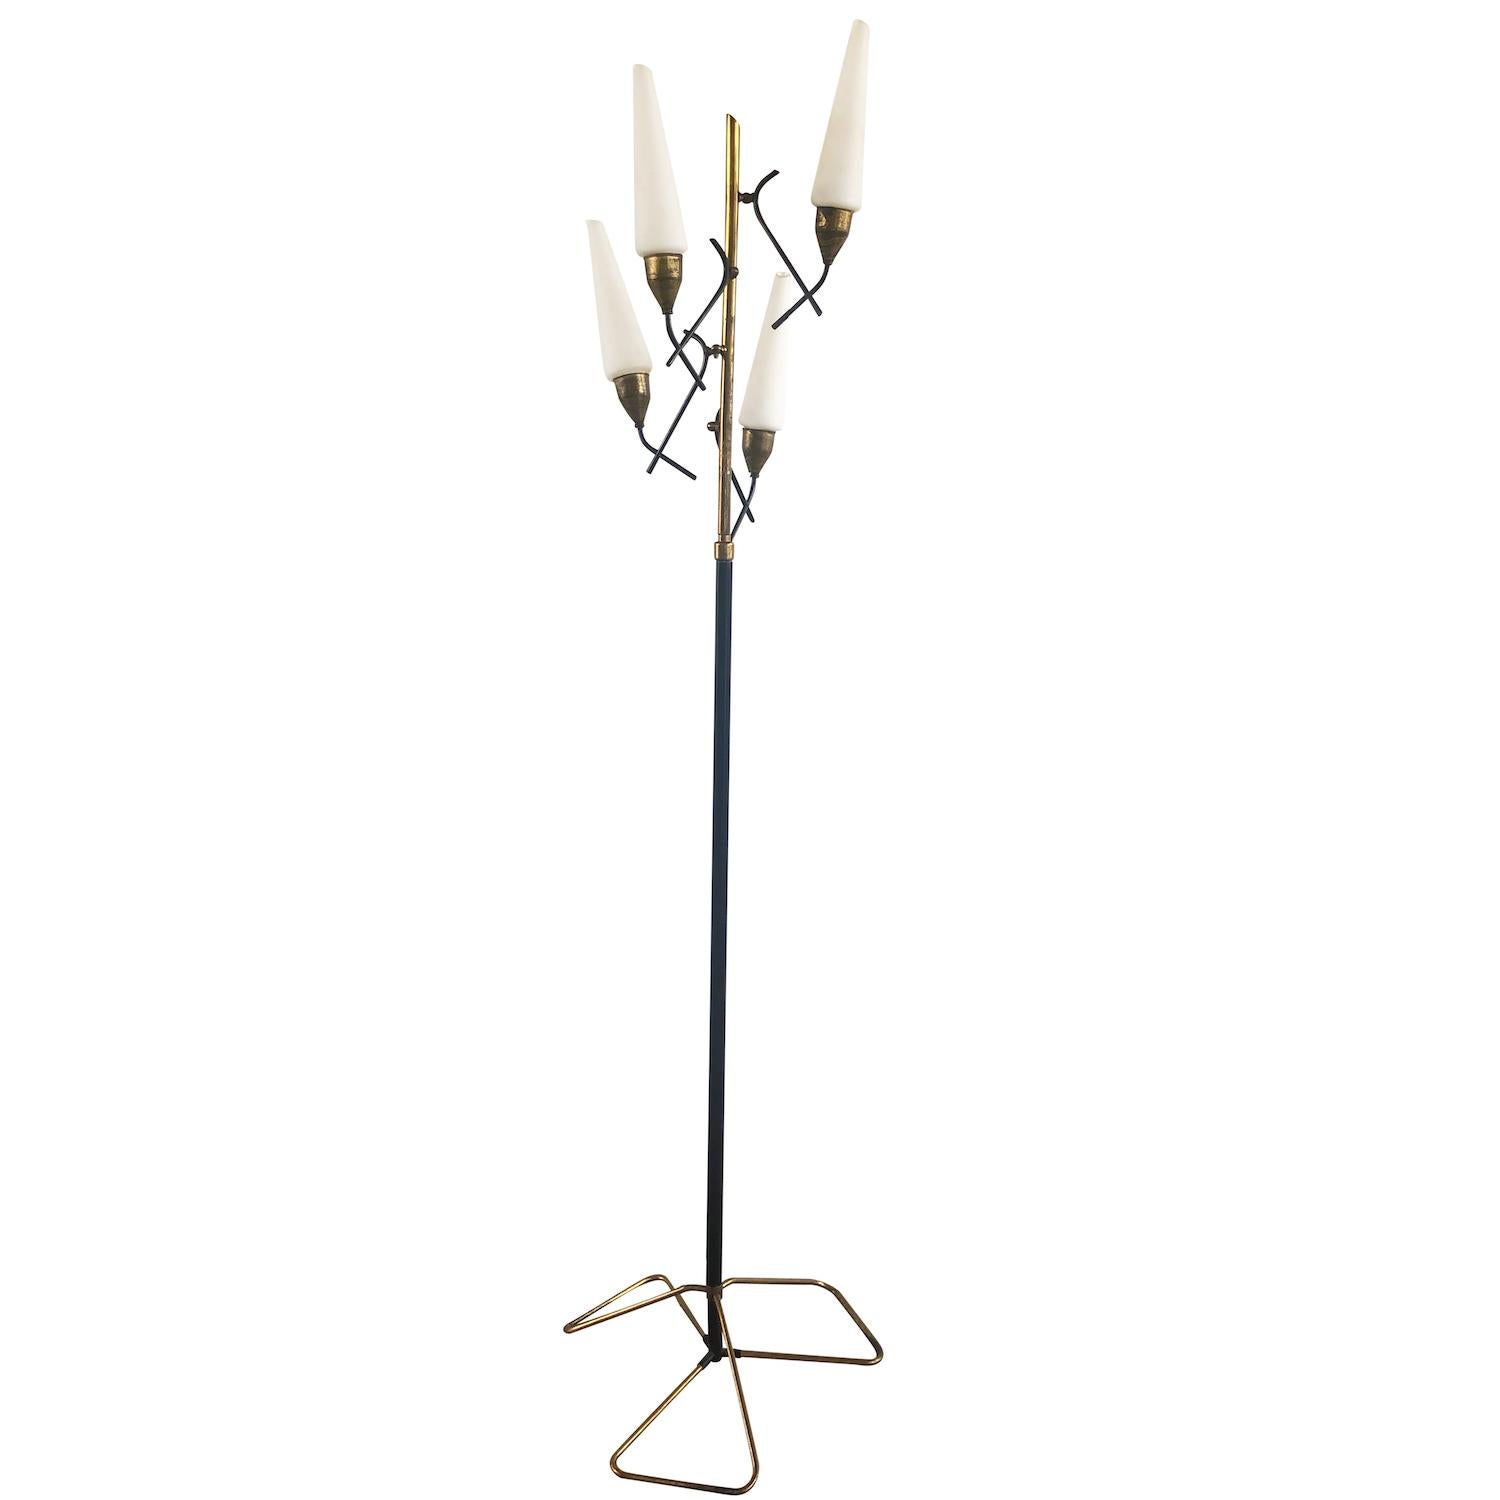 A black vintage Mid-Century Modern Italian floor lamp, light made of iron and brass. The opal glass shades are halted by four spiral arms. Produced by Stilnovo, each shade is featuring a one light socket in good condition. Model 336. The wires have